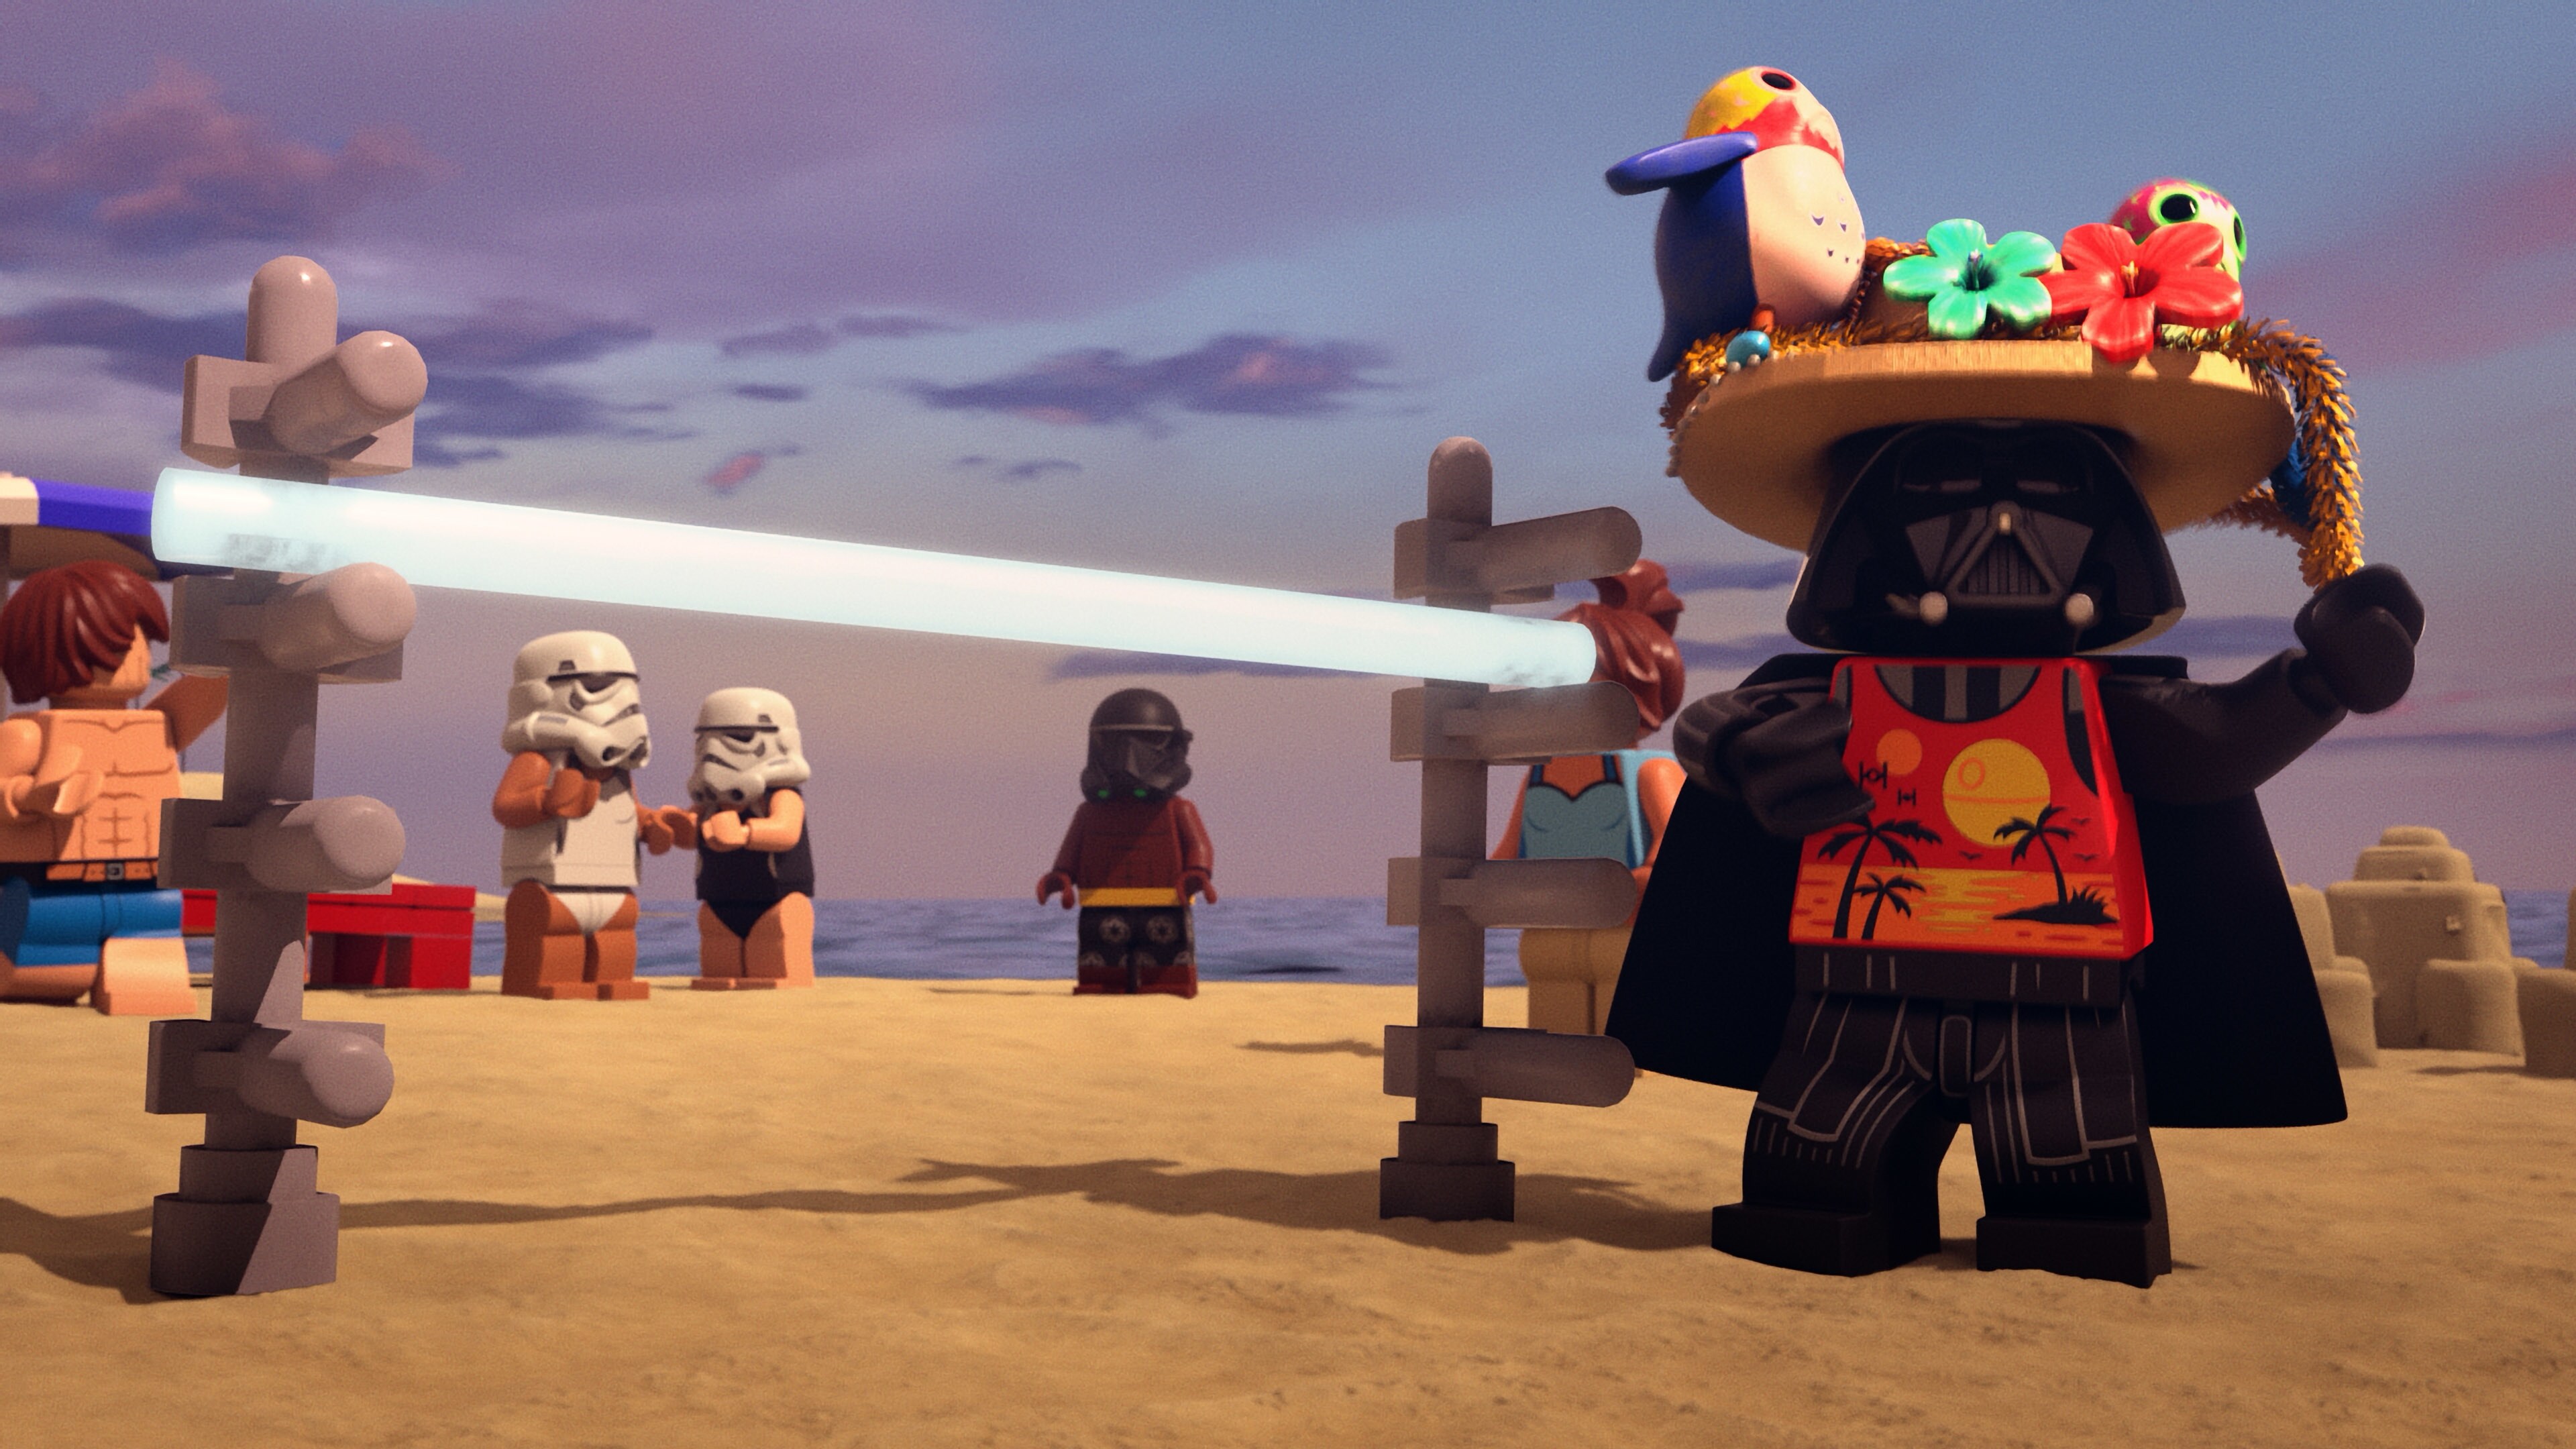 Darth Vader enjoying a Scarif beach party in LEGO® STAR WARS SUMMER VACATION exclusively on Disney+. ©2022 Lucasfilm Ltd. & TM. All Rights Reserved.